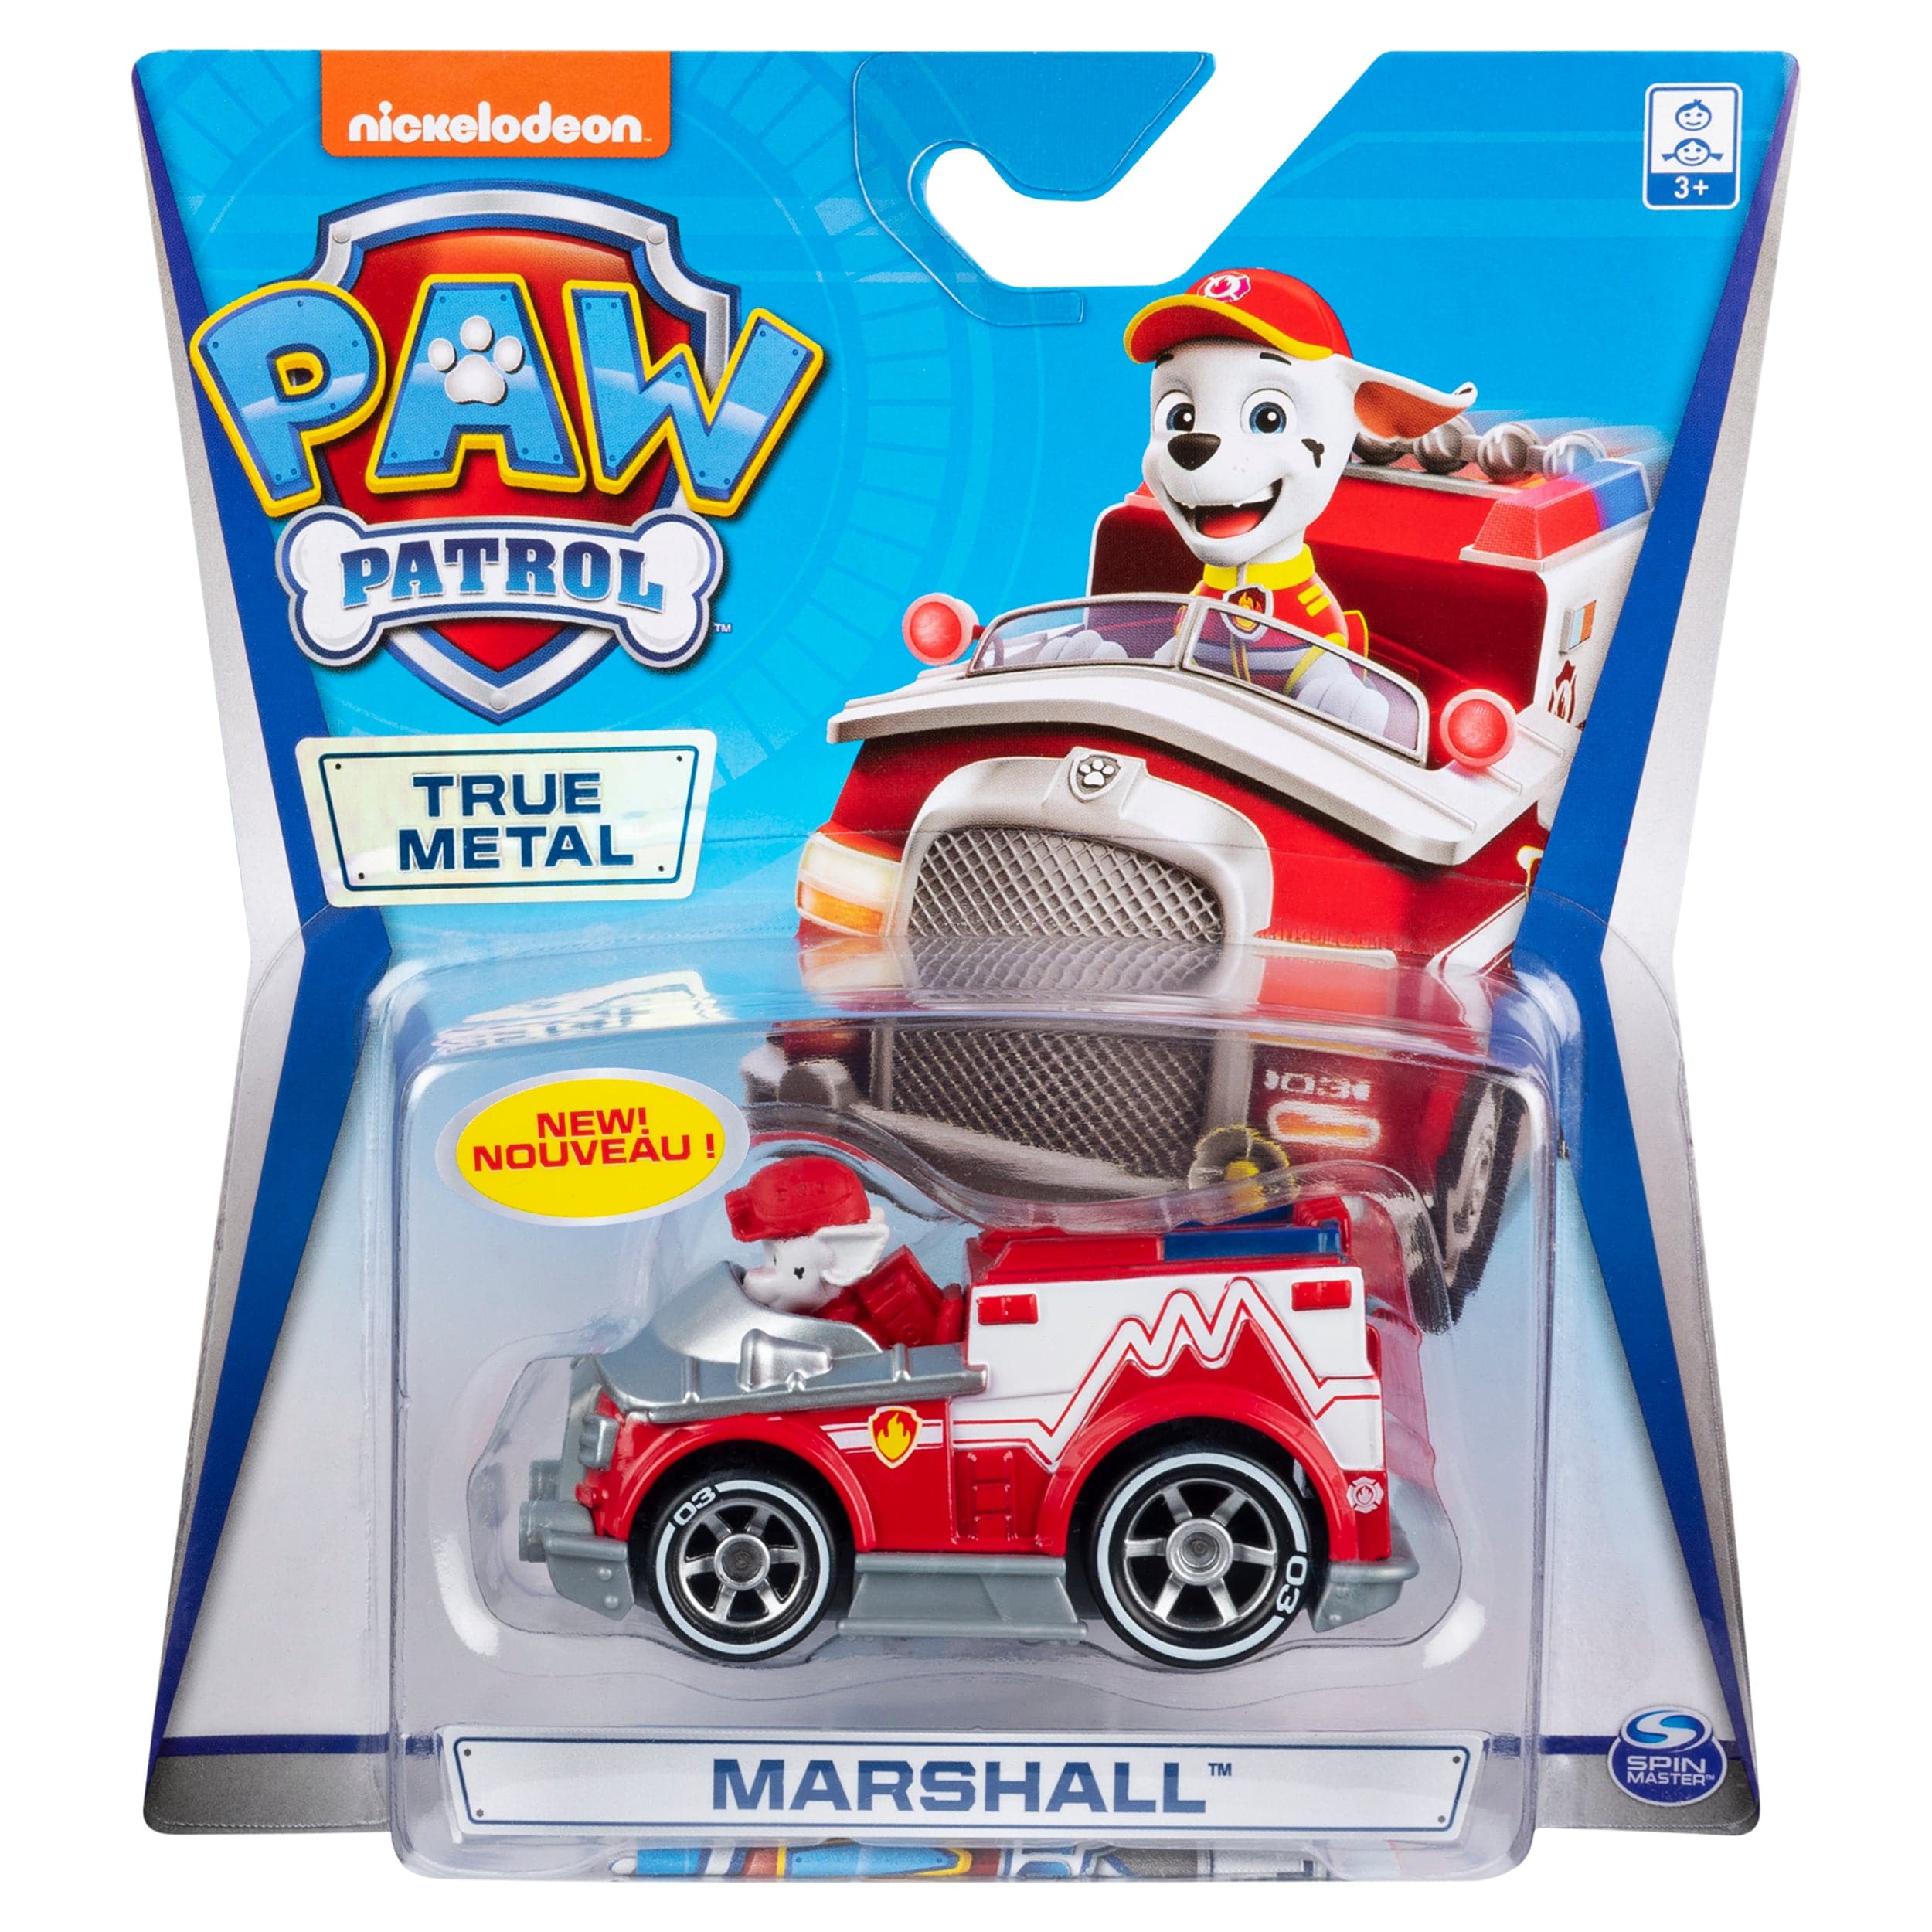  Paw Patrol, True Metal Total City Rescue Movie Track Set with  Exclusive Marshall Vehicle, 1:55 Scale, Kids Toys for Ages 3 and up : Toys  & Games